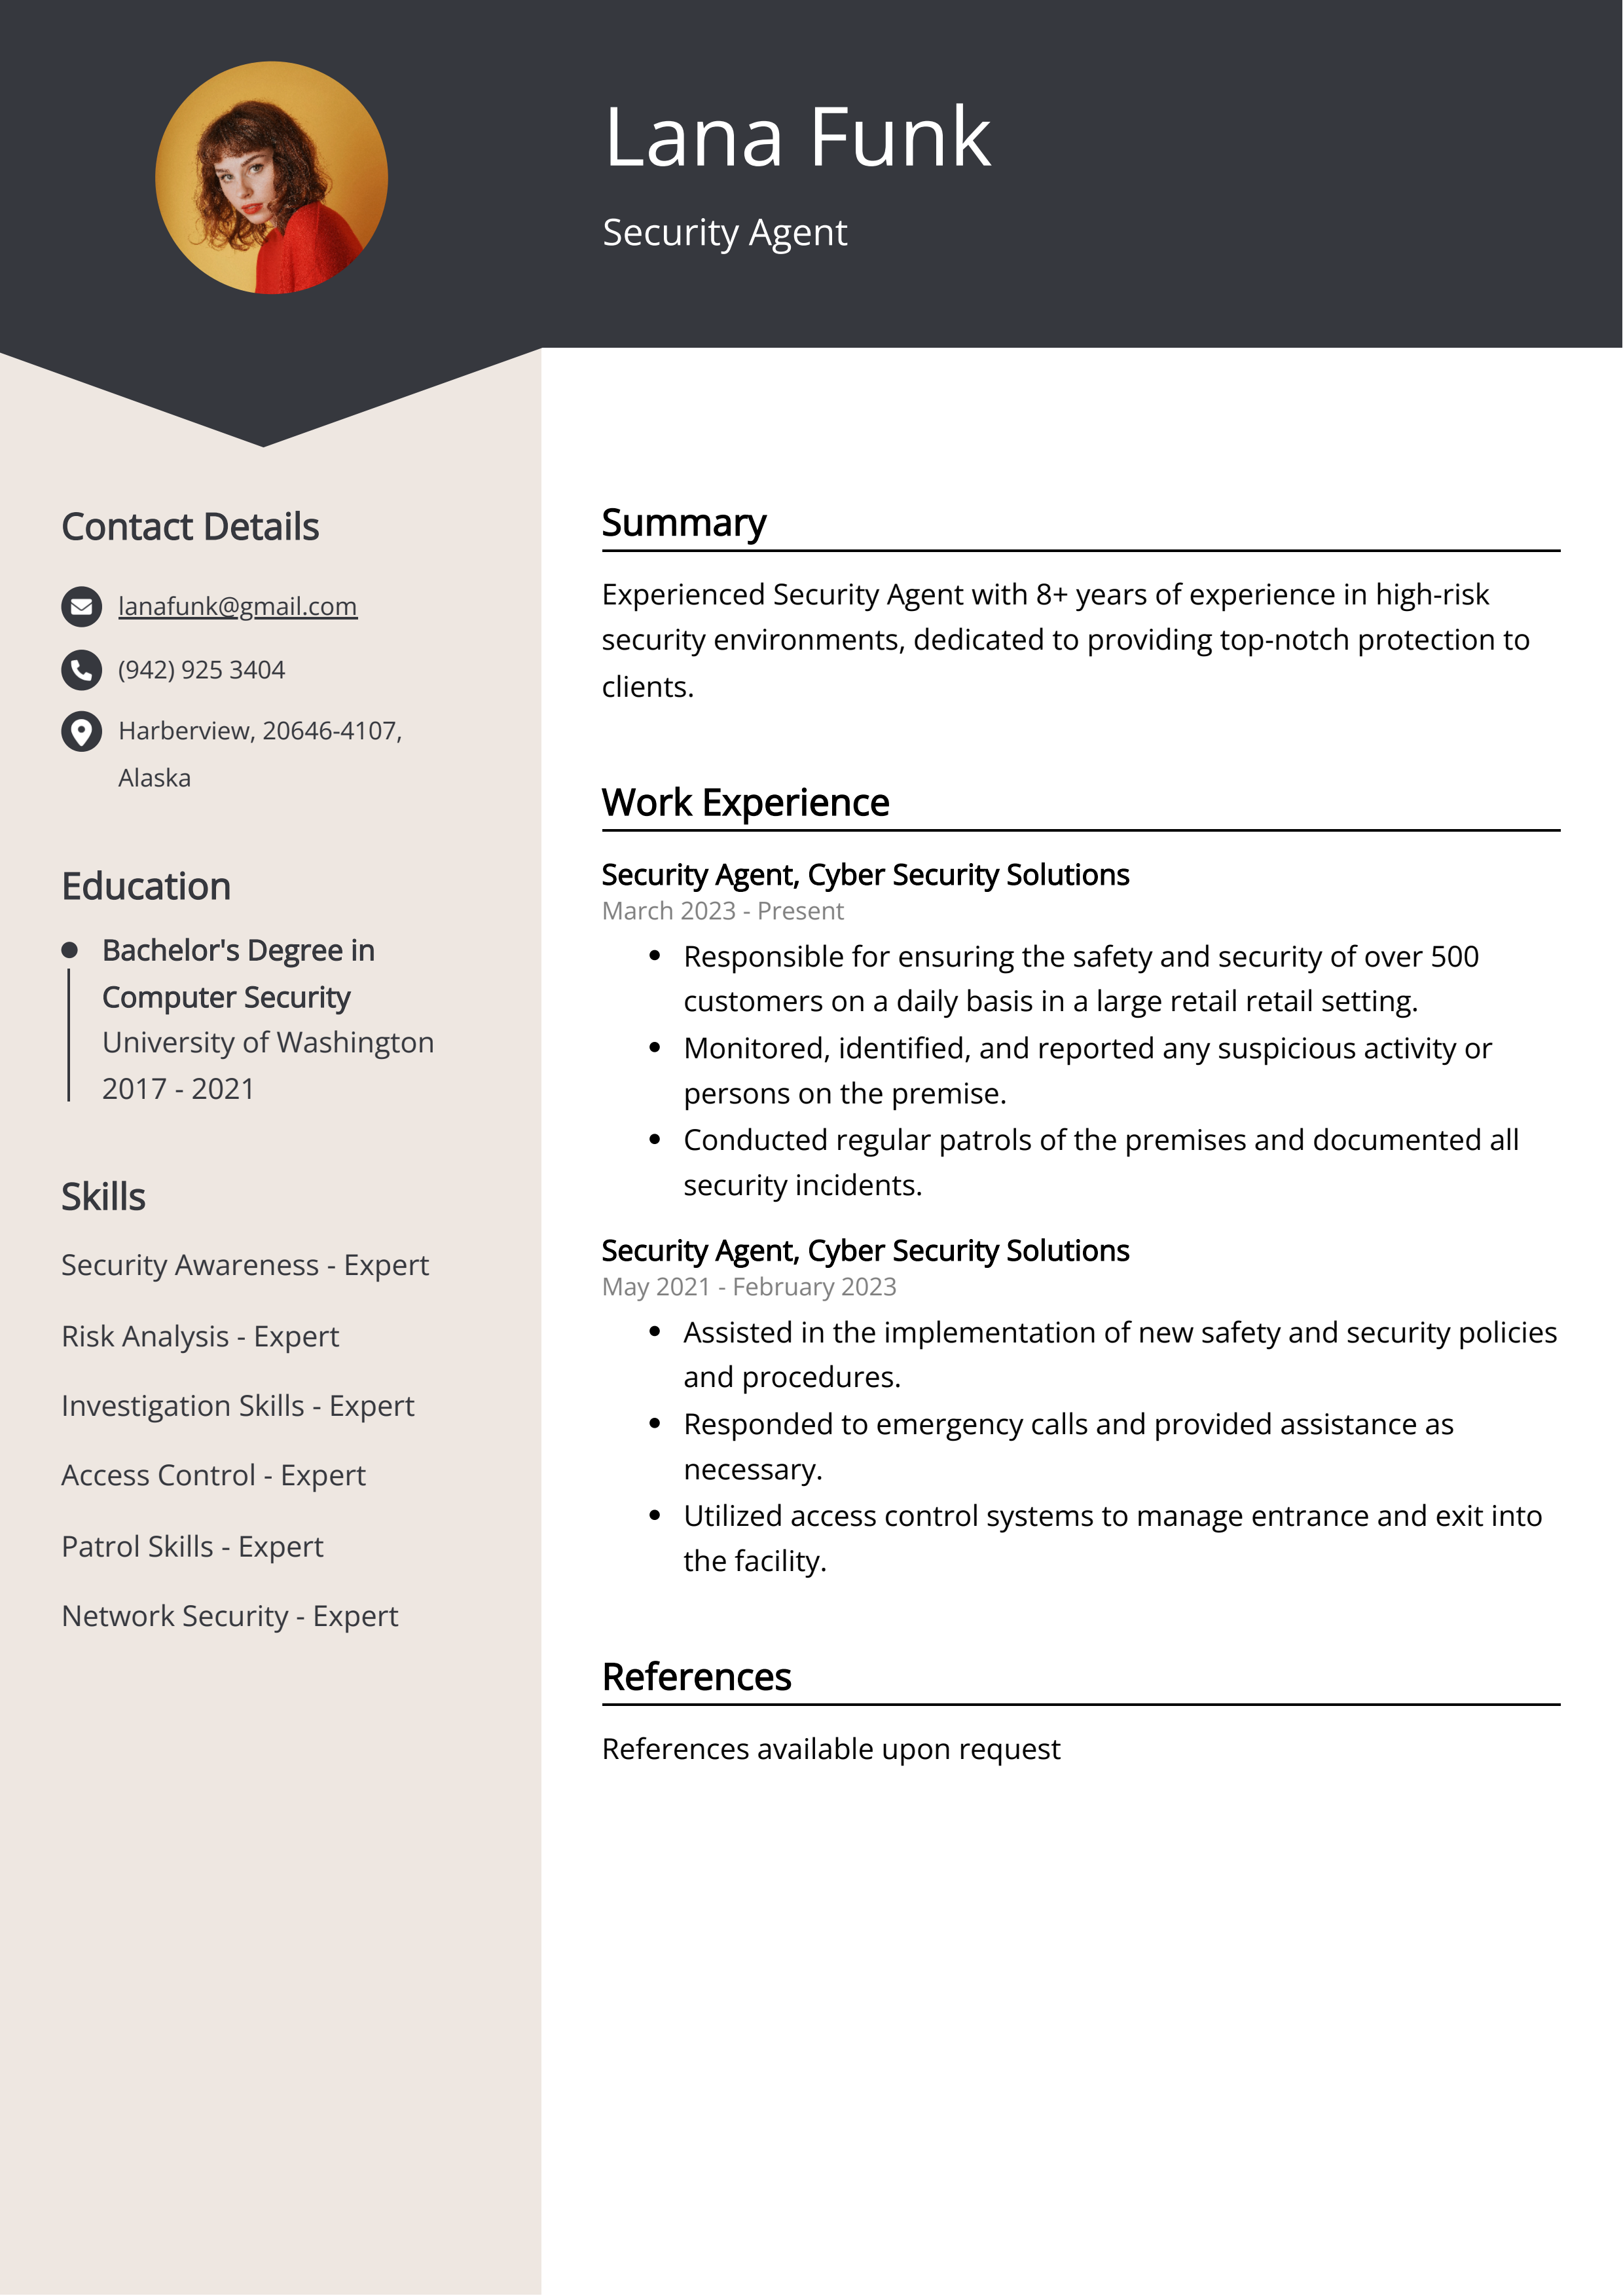 Security Agent CV Example